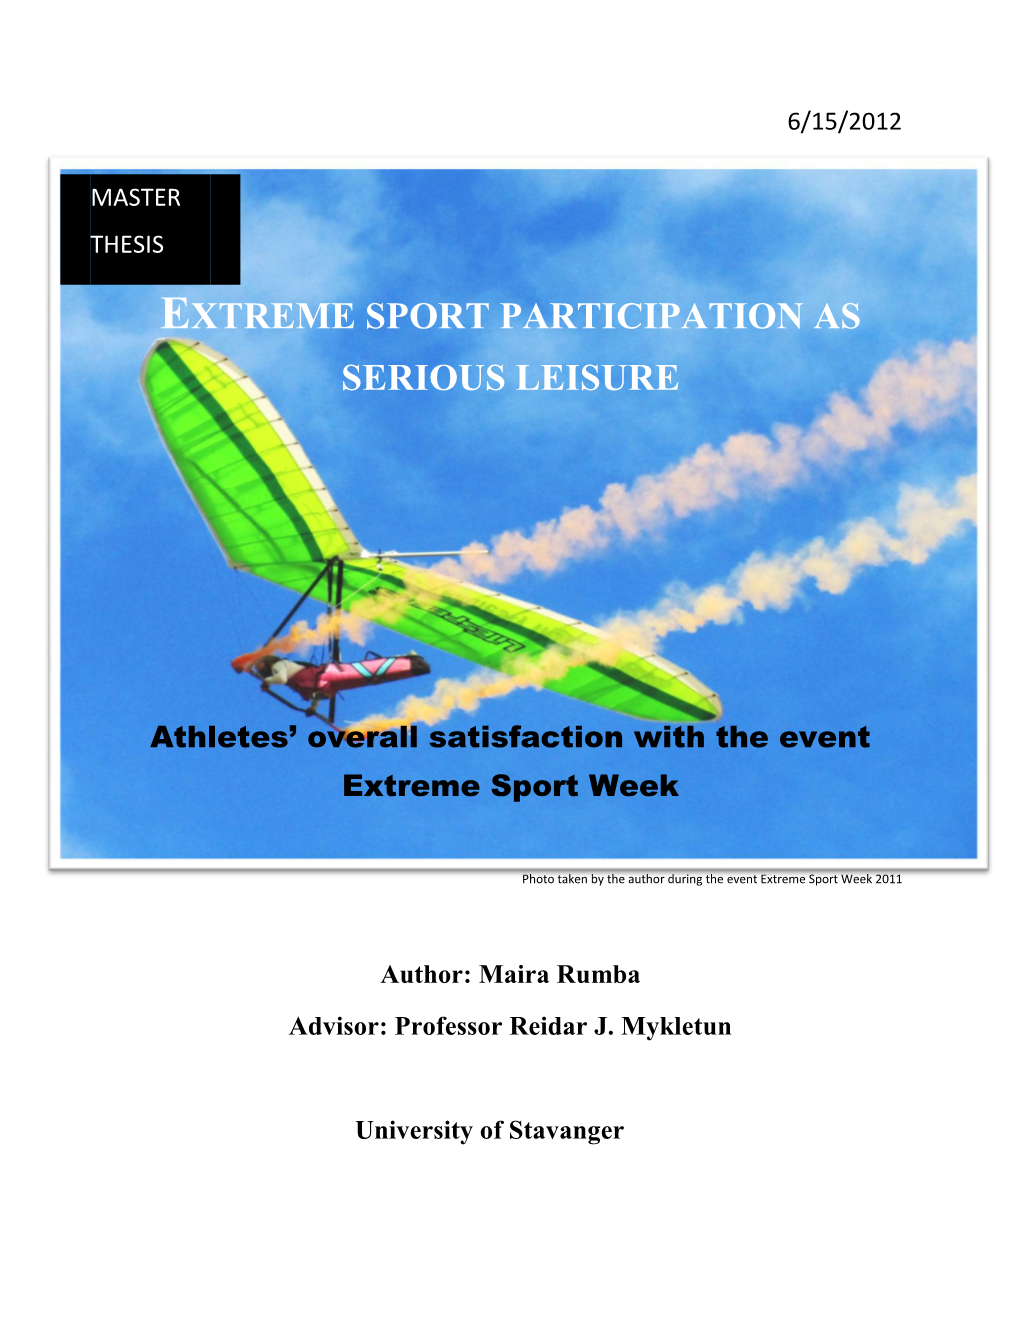 Extreme Sport Participation As Serious Leisure